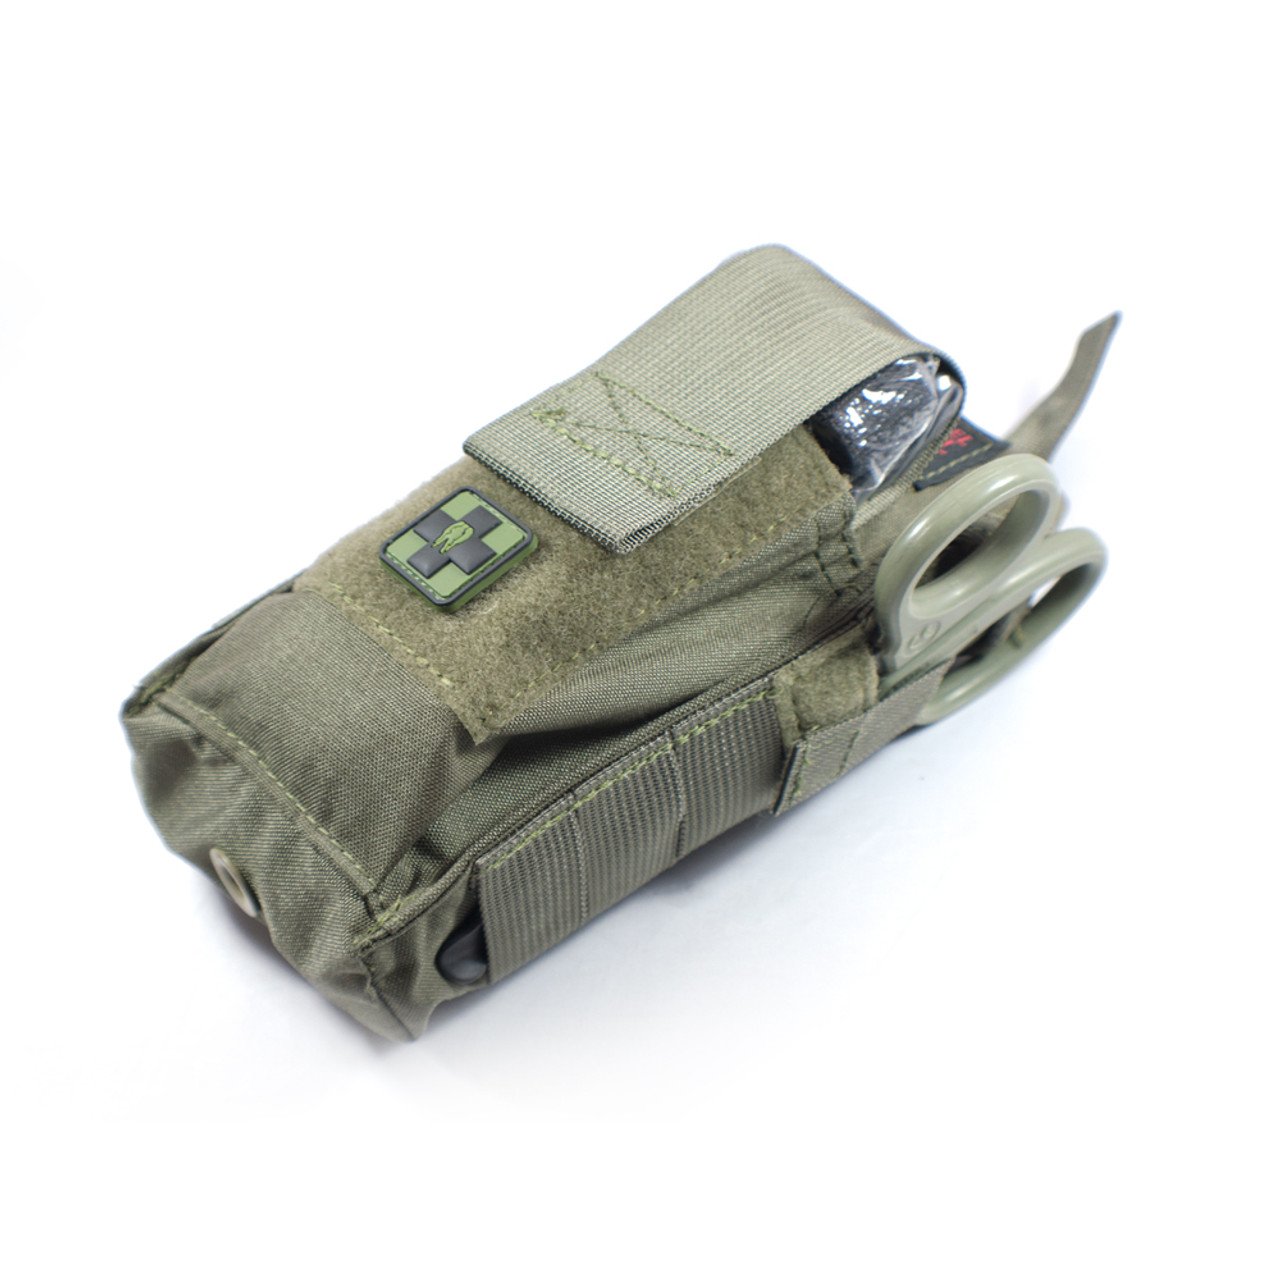 IFAK SIDESTRAP POUCH - Armor Express